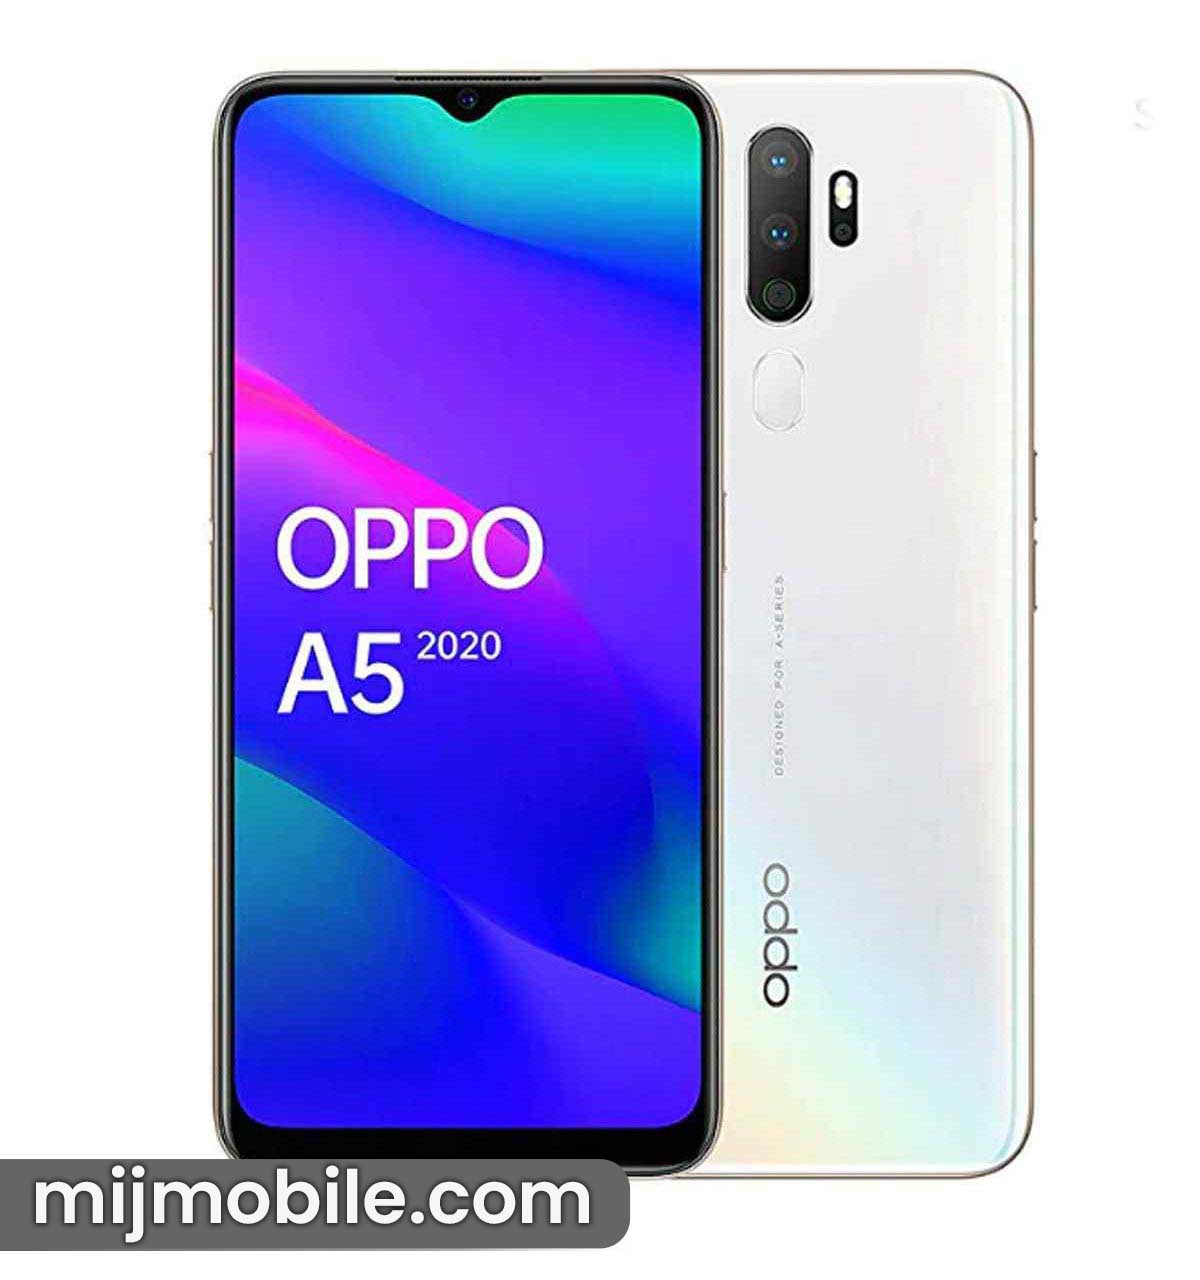 Oppo A5 2020 Price in Pakistan & Specifications Oppo A5 2020 Price in Pakistan is only 31,999.